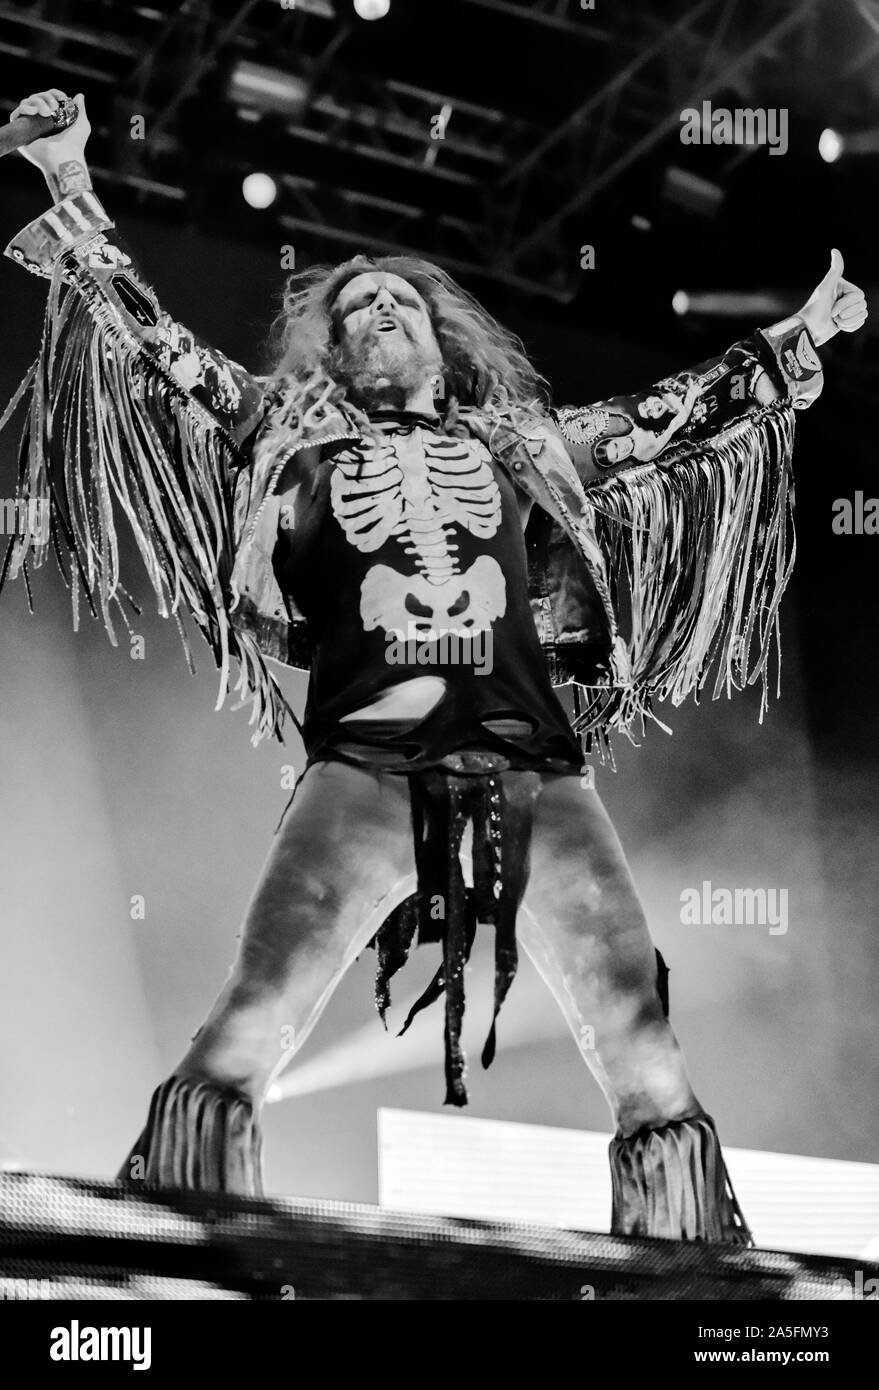 Las Vegas, Nevada, USA. October 19, 2019. Rob Zombie performing in concert  at the third annual Las Rageous heavy metal music festival held at the  Downtown Las Vegas Events Center. Photo Credit: